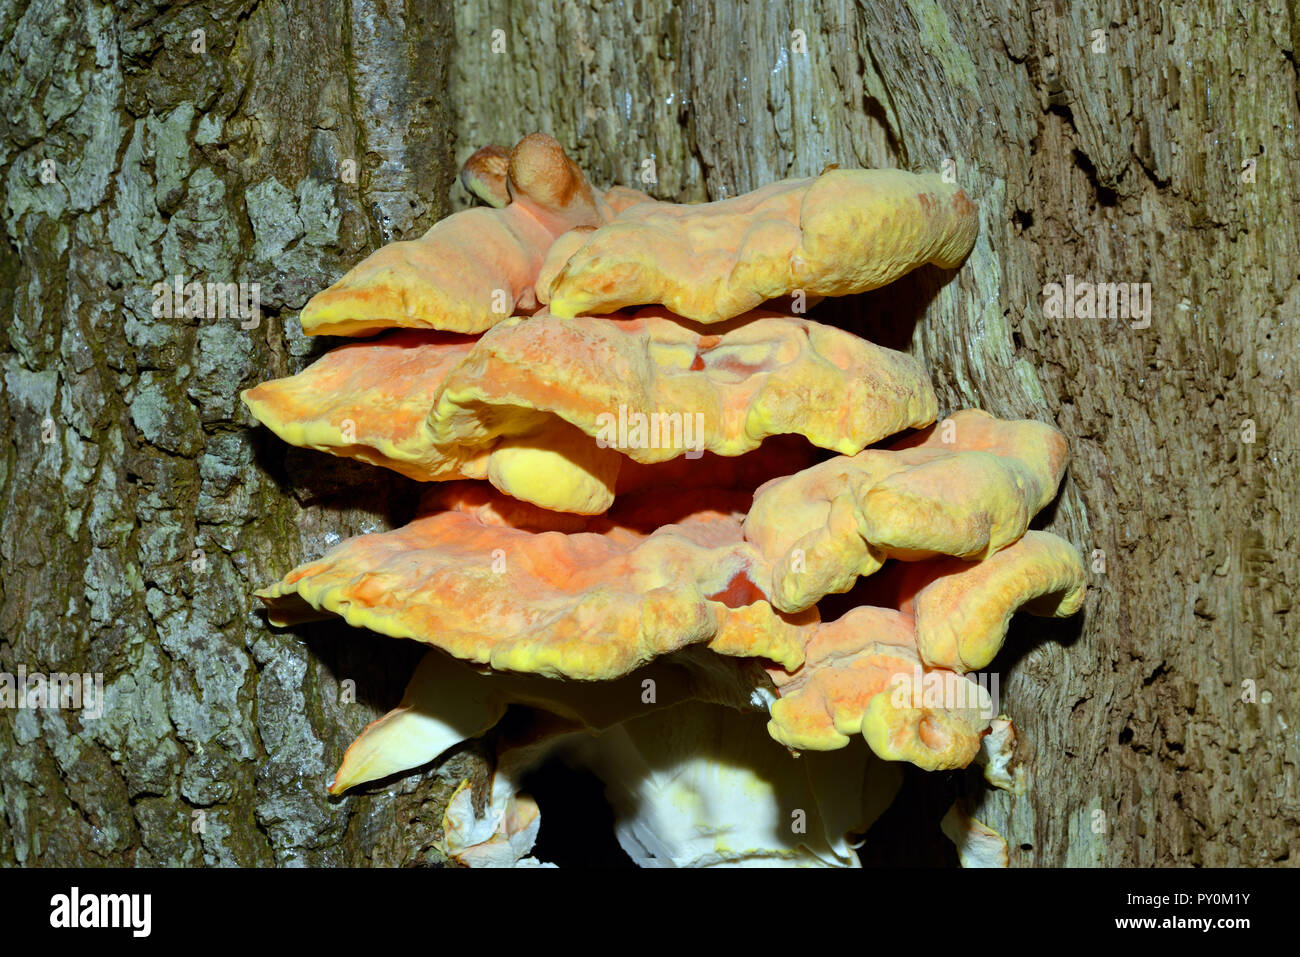 Laetiporus sulphureus (sulphur polypore) is a species of bracket fungus found in Europe and North America. It can be parasitic. Stock Photo